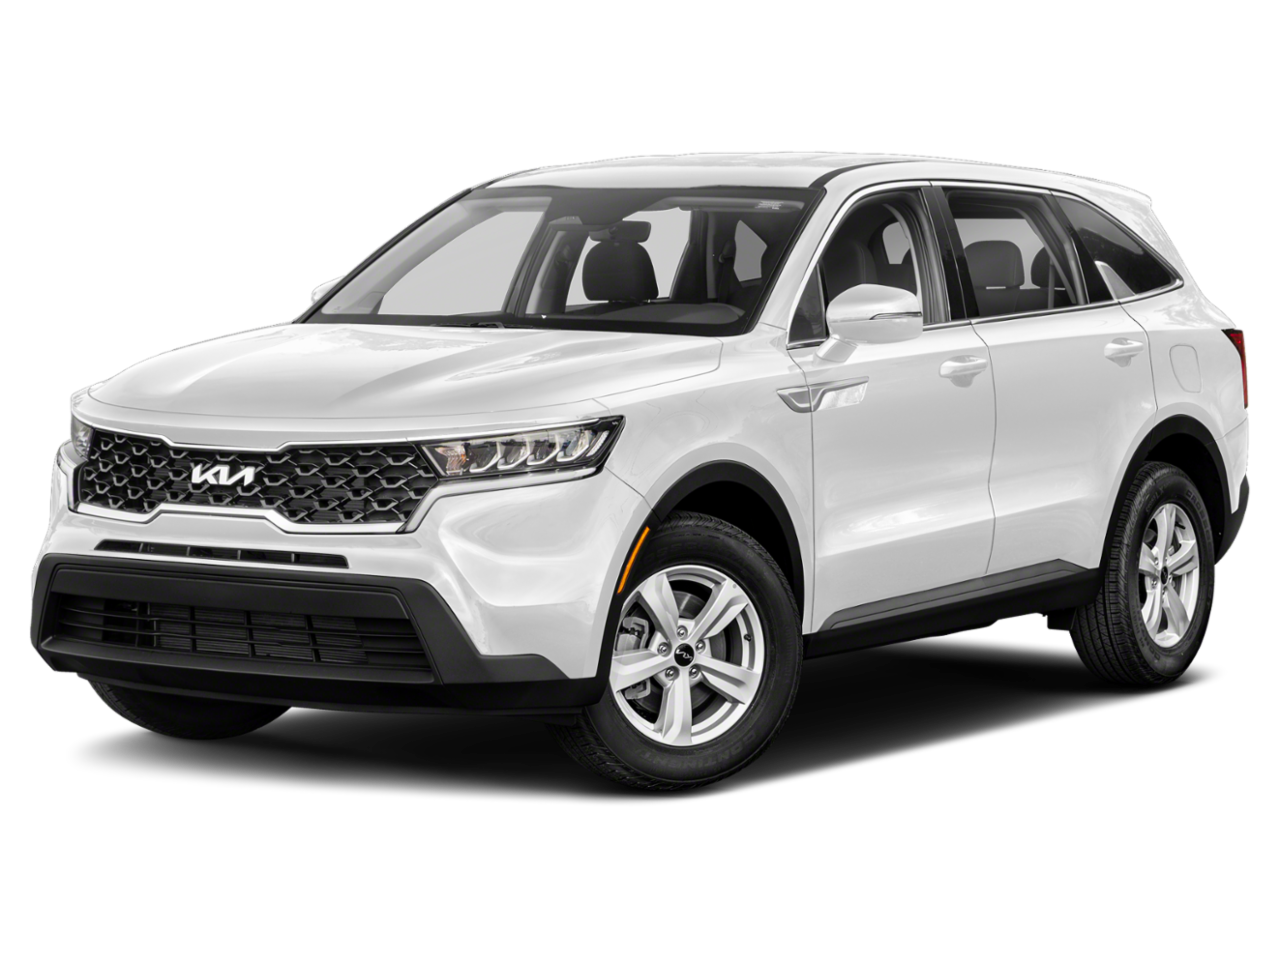 New Kia Sorento from your Olean, NY dealership, Paul Brown Auto Group.